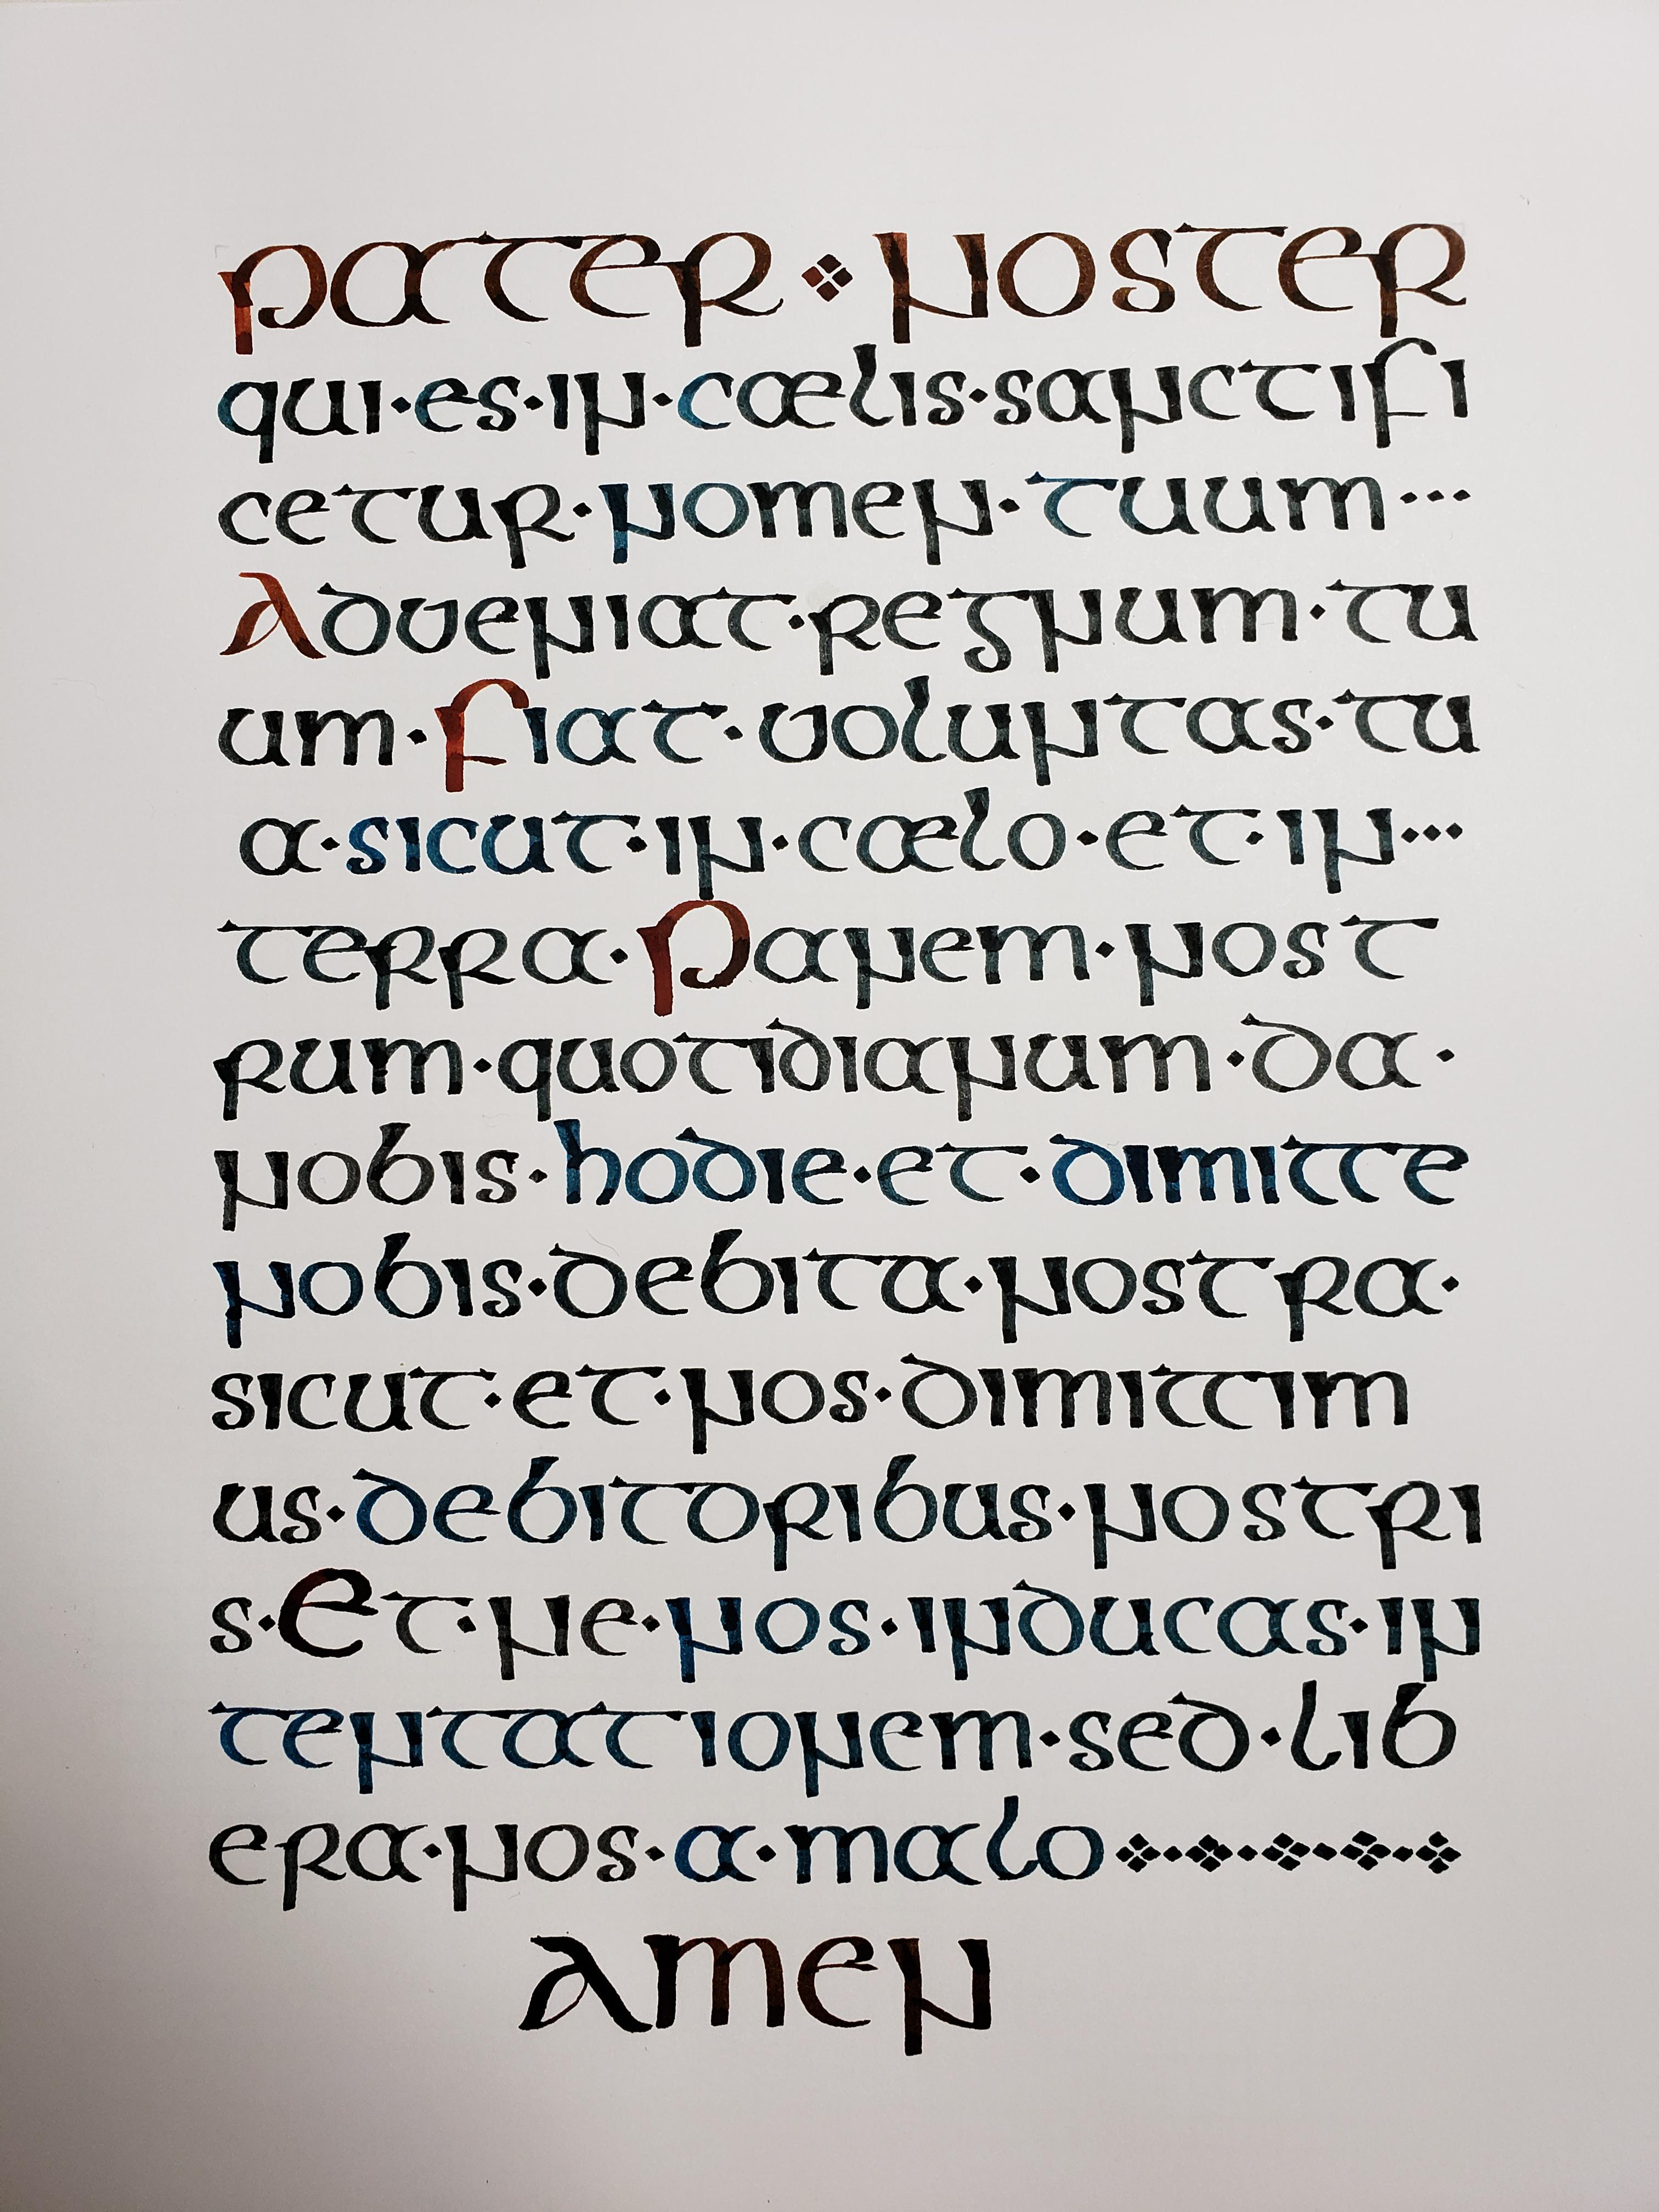 Just Finished! Pater Noster (Our Father In Latin) In Insular pour Majuscule Script